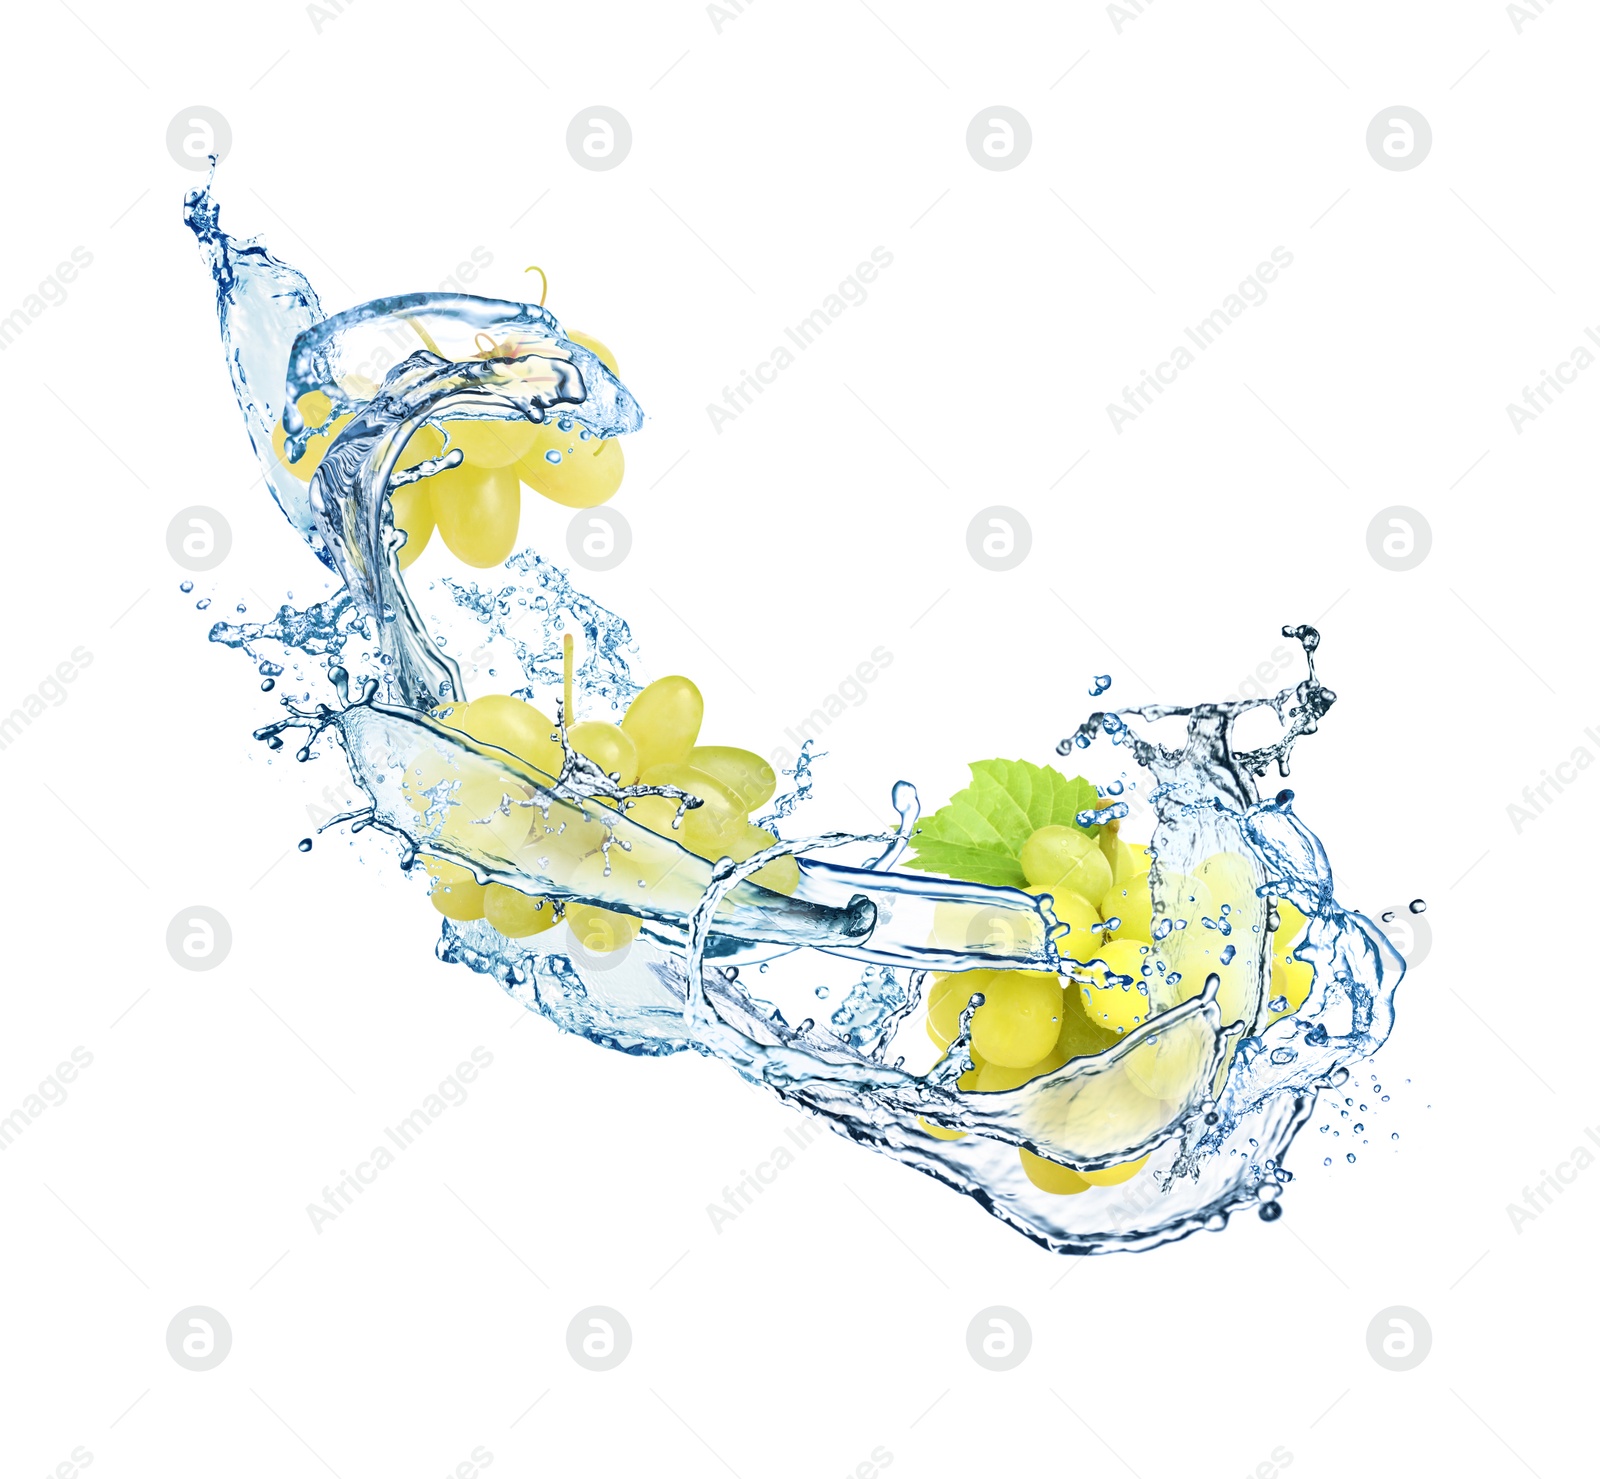 Image of Grapes with water splash on white background